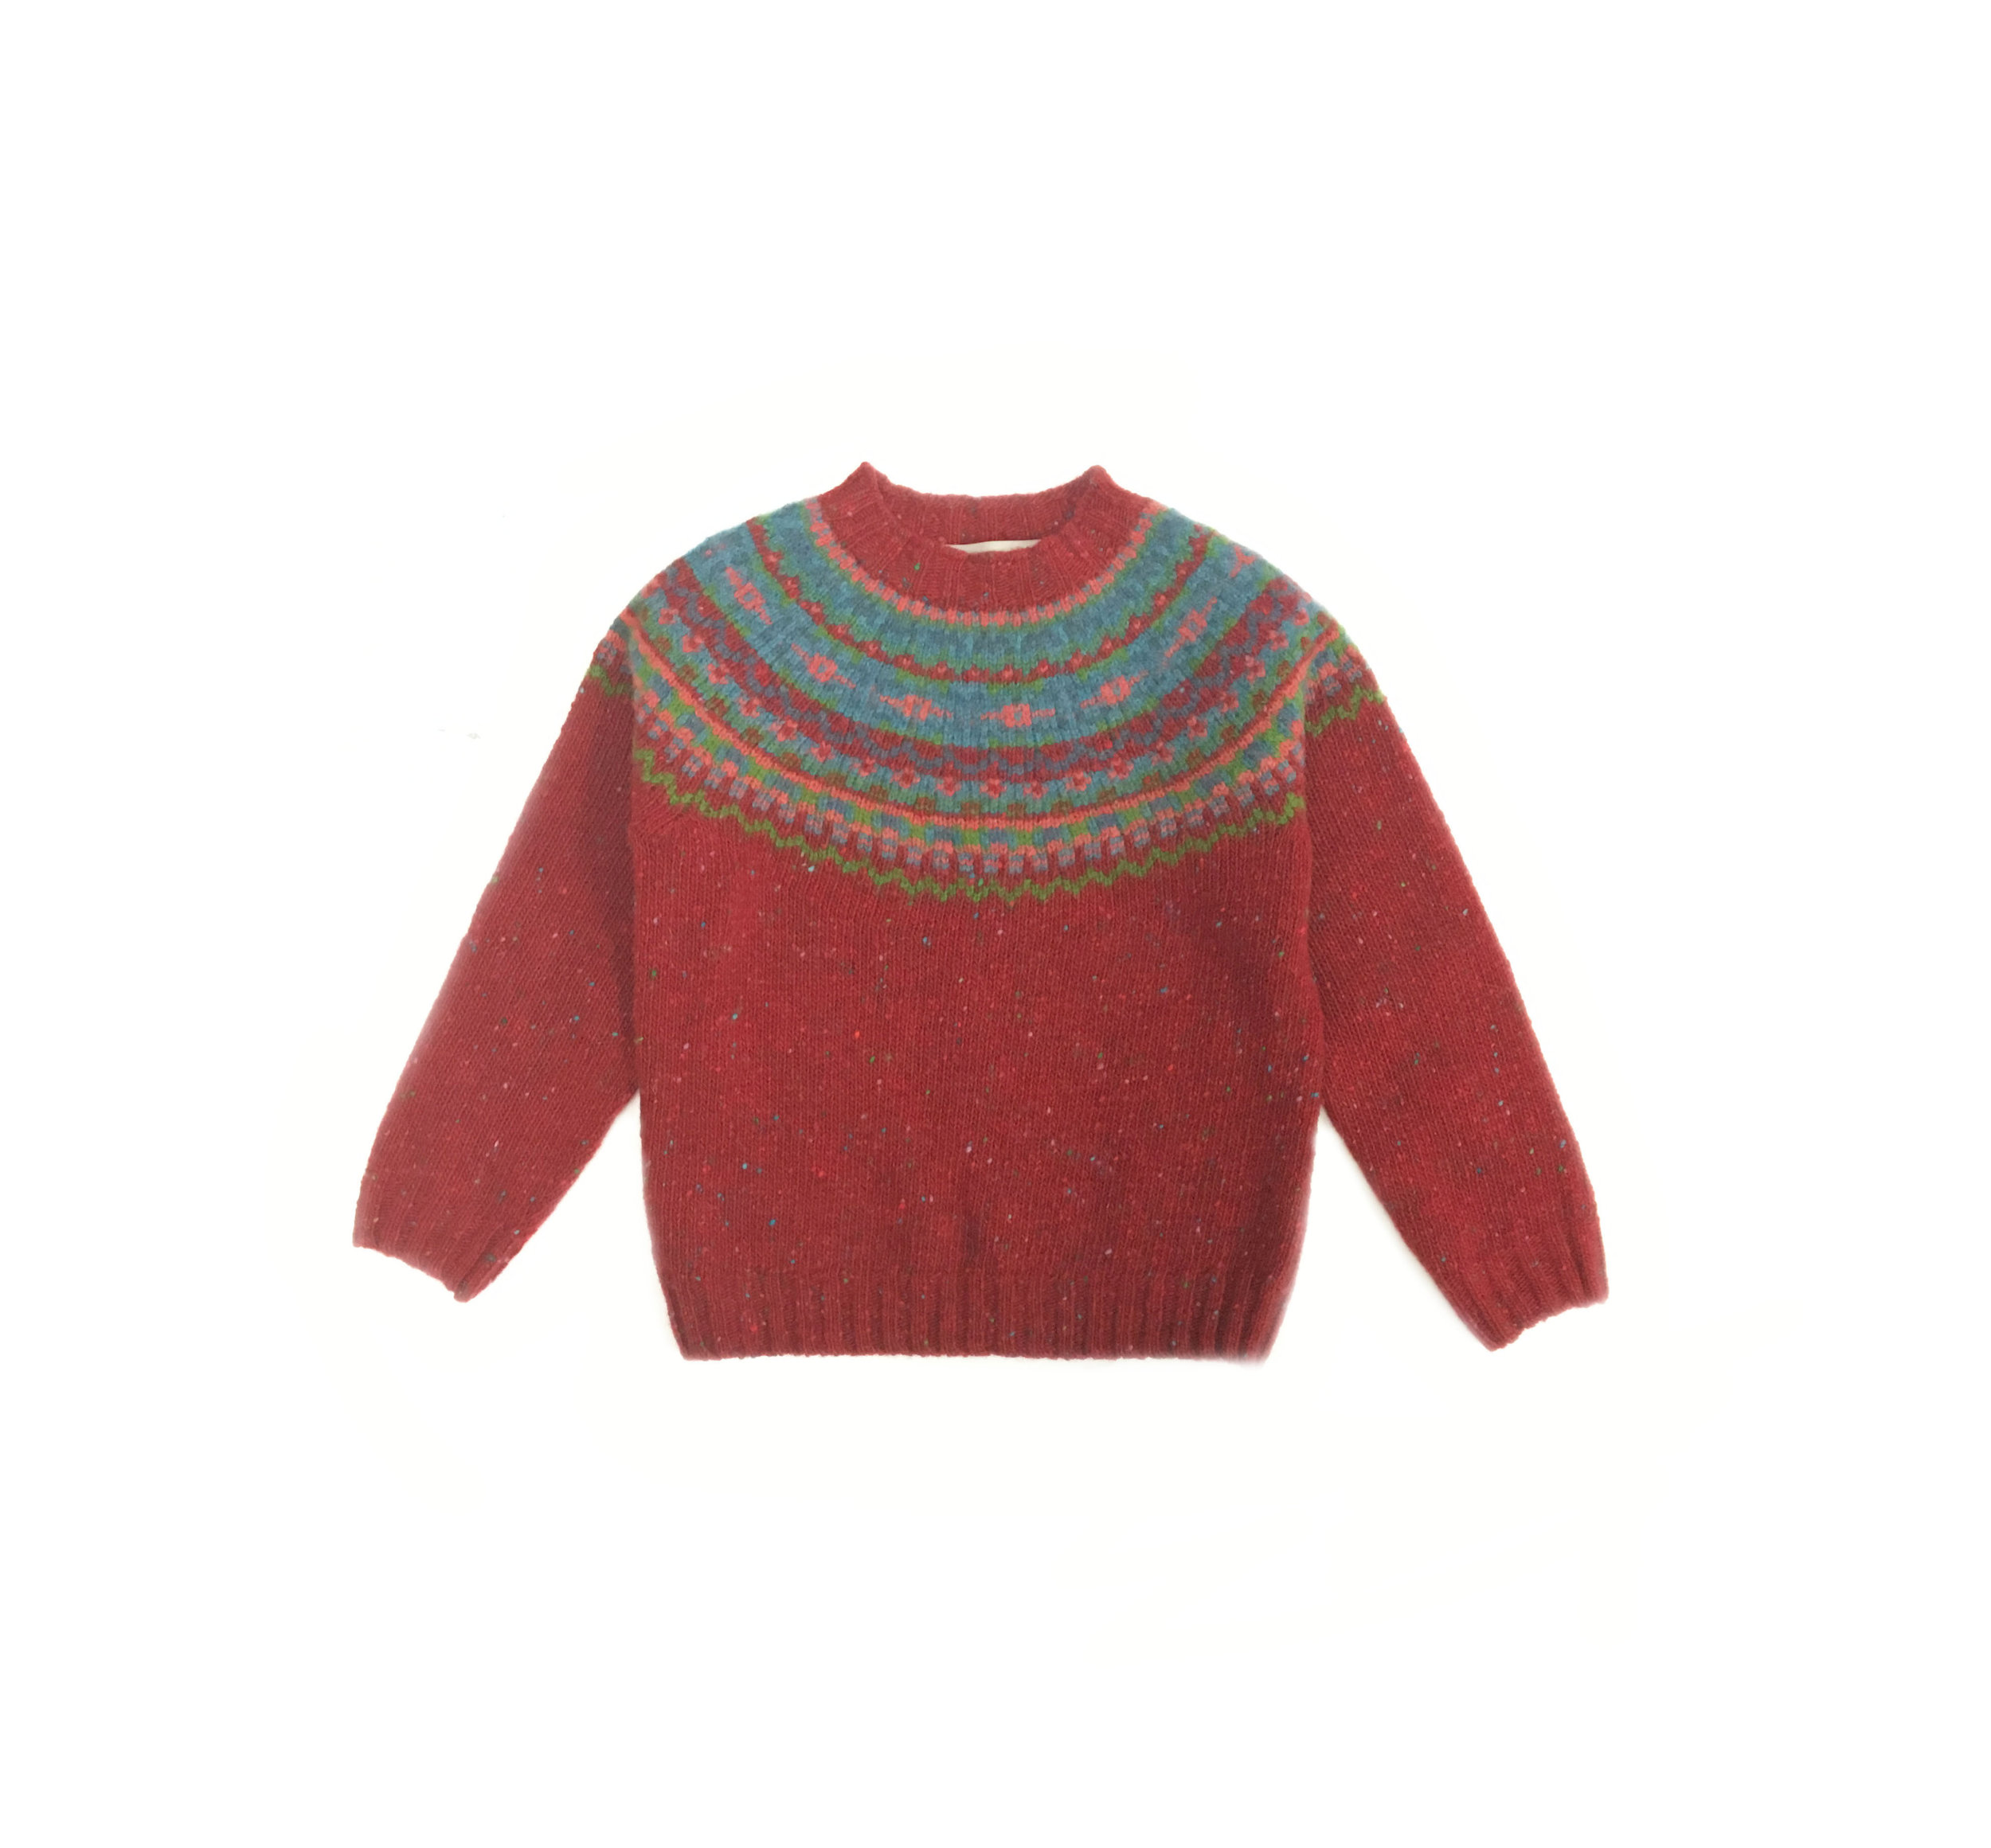 An image of Flora Donegal - Bonfire - Sweater/Age 5-6